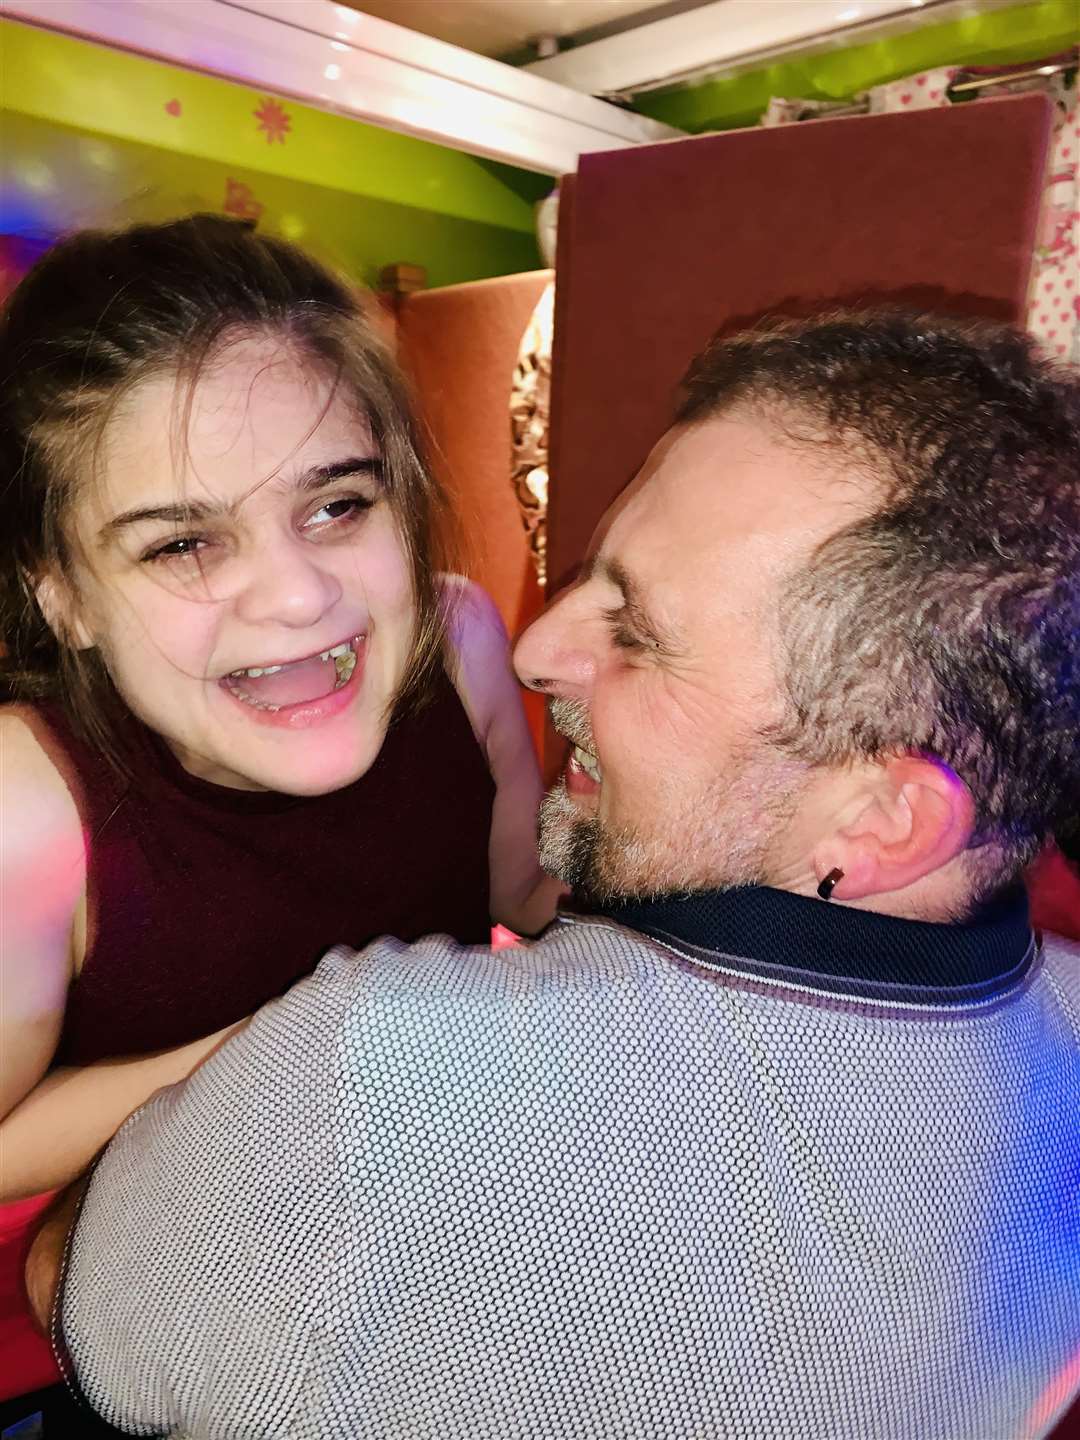 Brett Martin would just like to be able to hug his daughter Charlotte again this Christmas